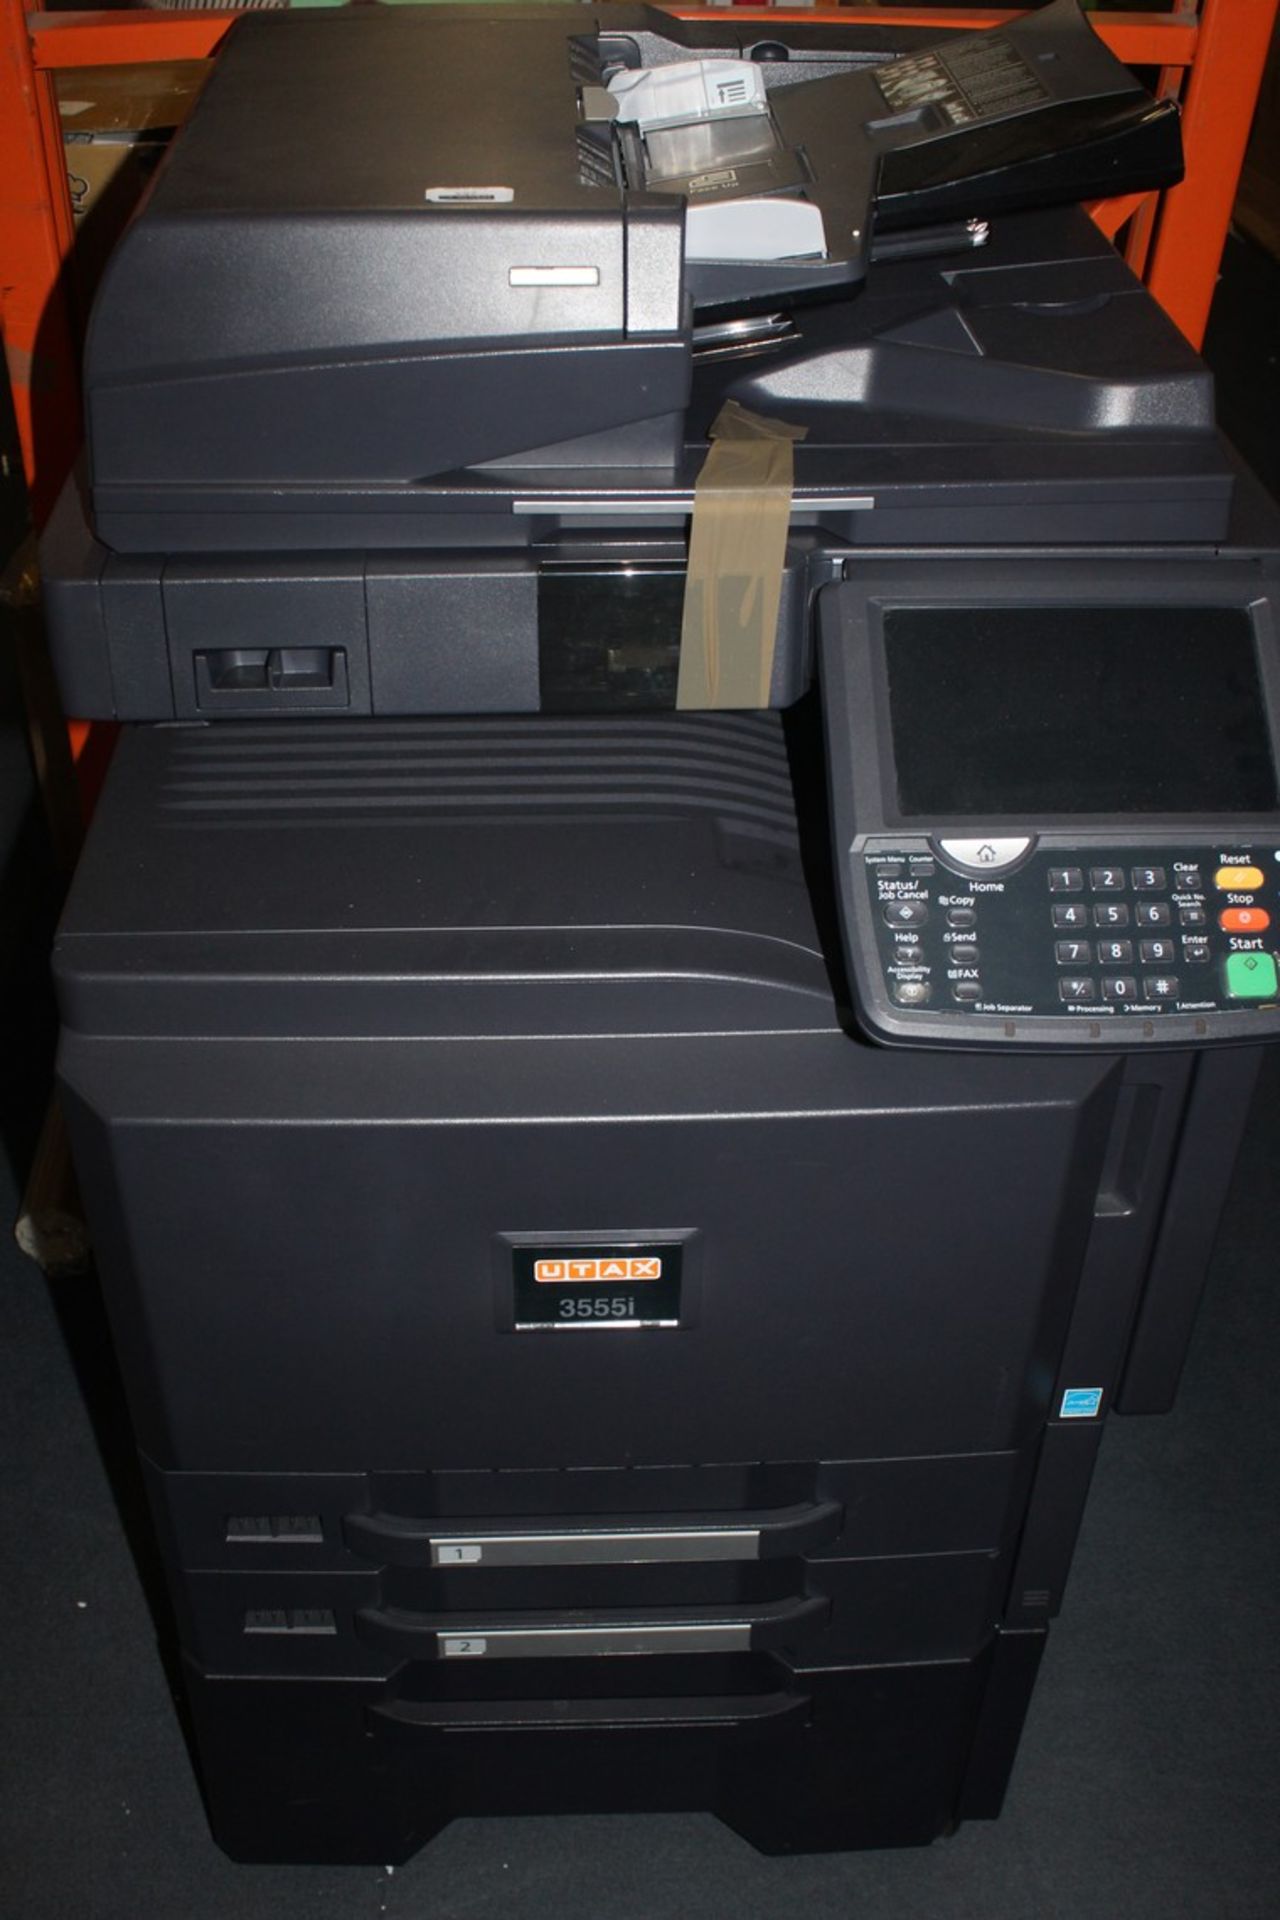 Utax 3,305 CI Printer - 30 Pages Per Minute, Print Copy, Scan And Staple, 2x500 Sheet Paper